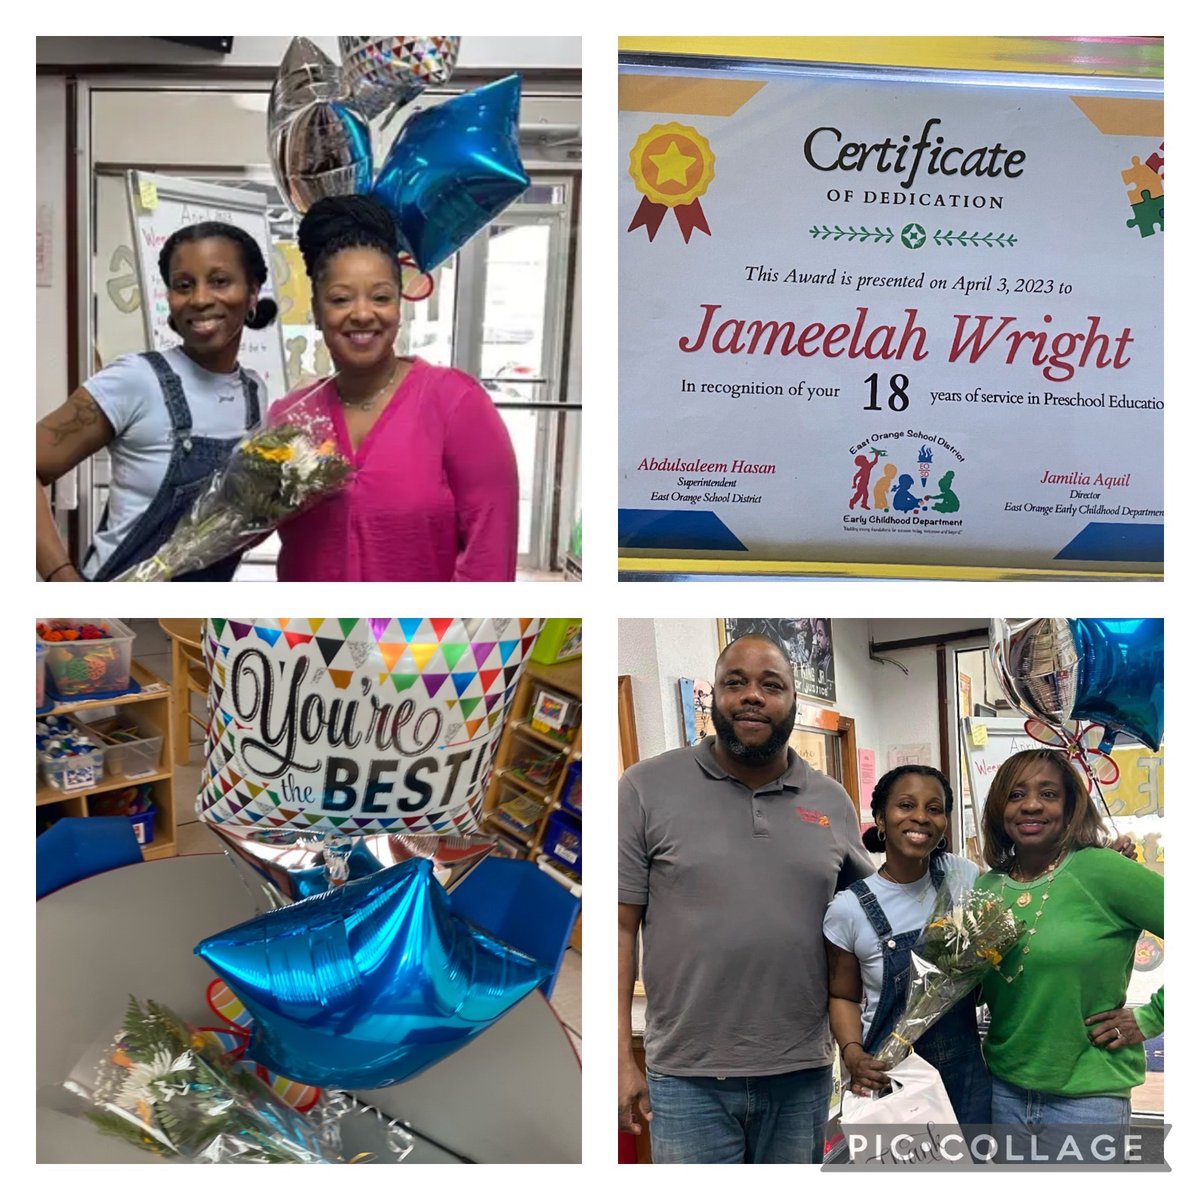 Special thanks to the East Orange Early Childhood Department for acknowledging my 18 years of service to preschool!! It is truly an honor and a privilege! 💐🎈#preschoolrules #earlychildhoodmatters